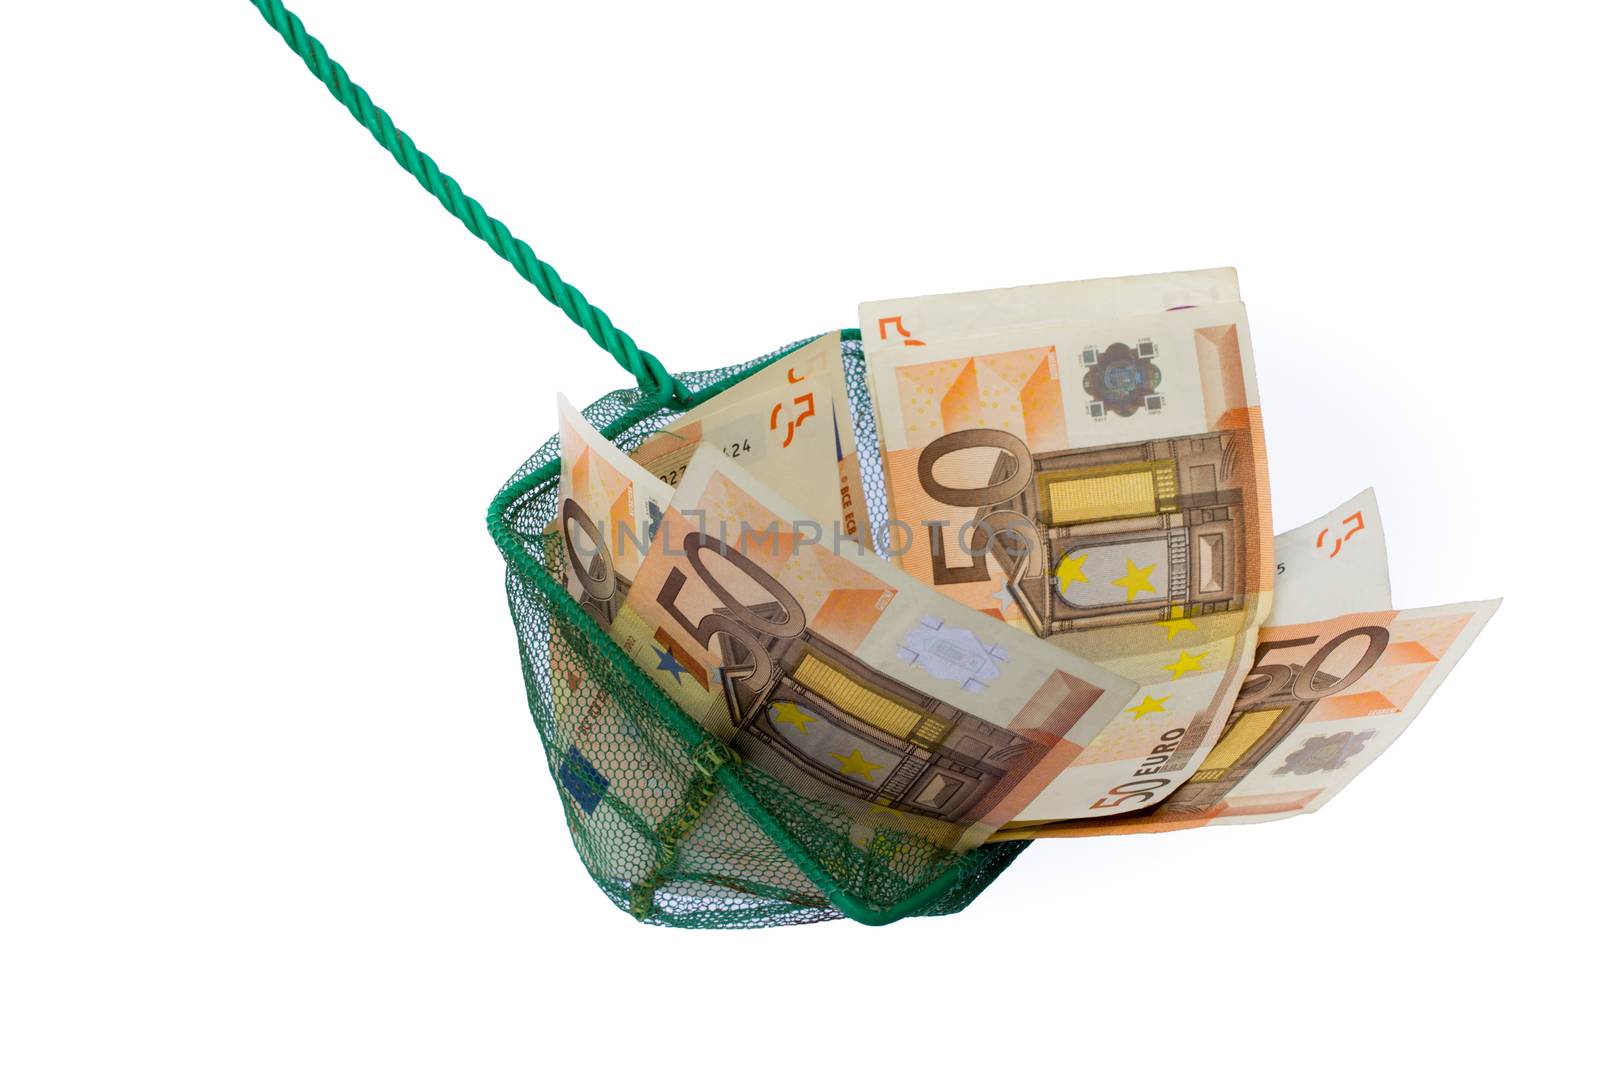 Fishing net filled with euro notes by BenSchonewille